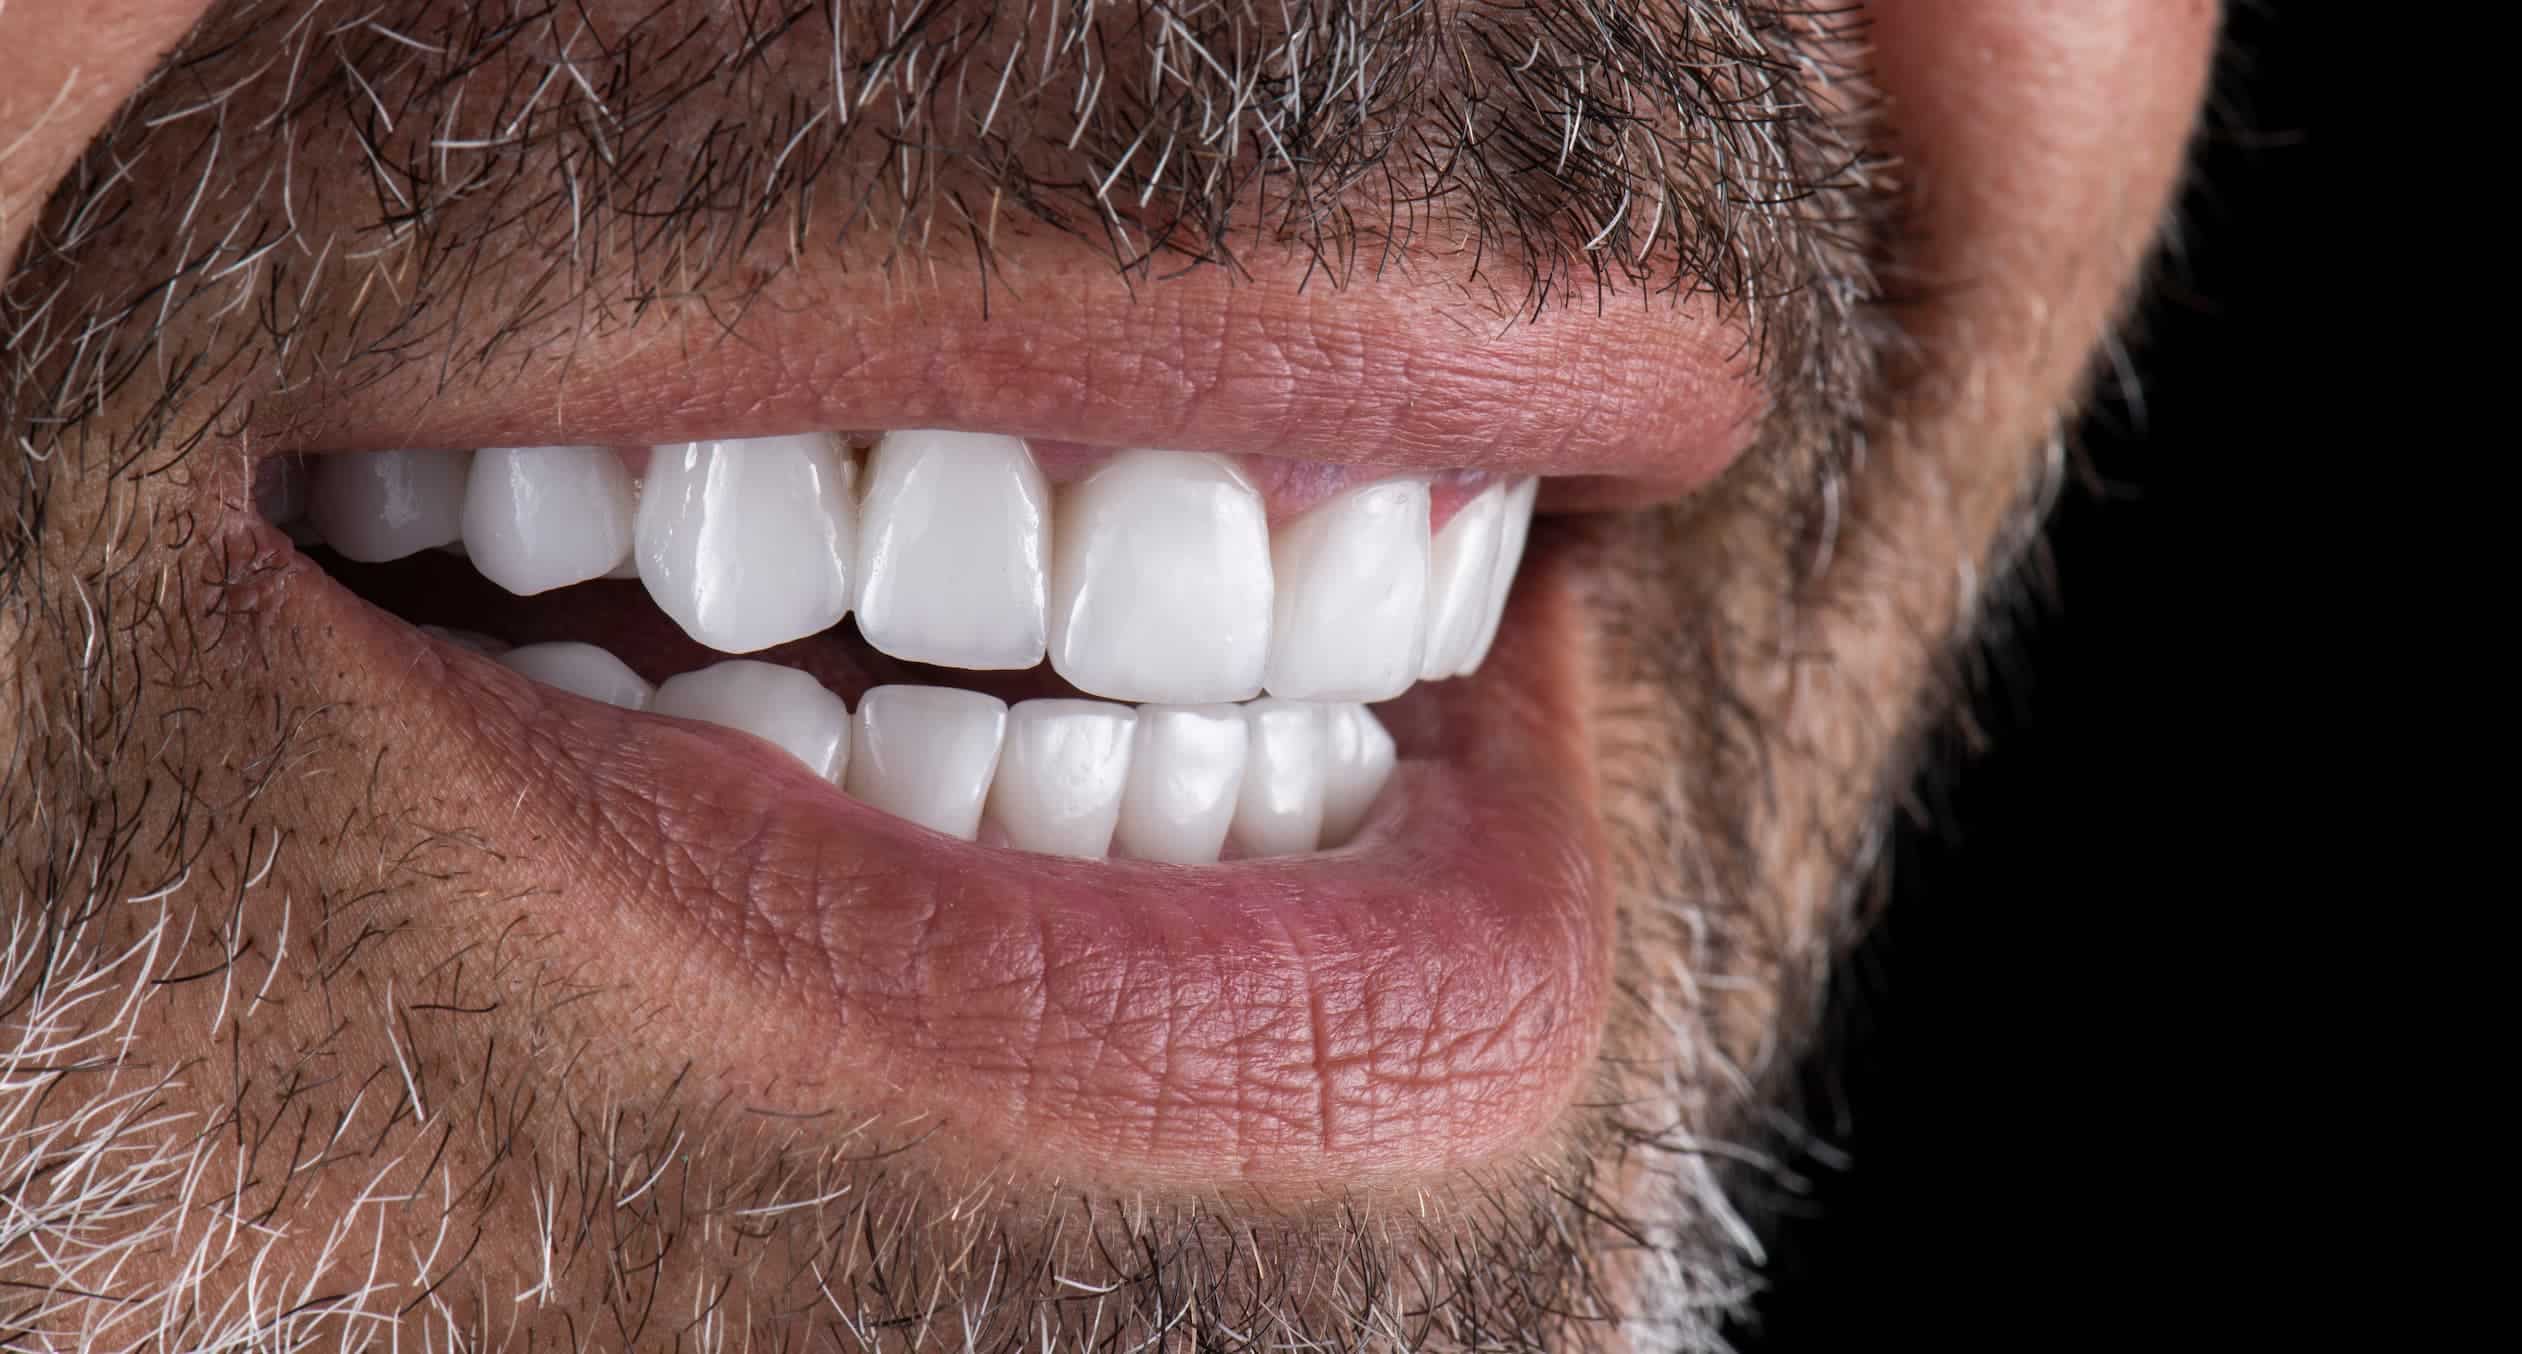 The benefits of dental veneers for improving your smile